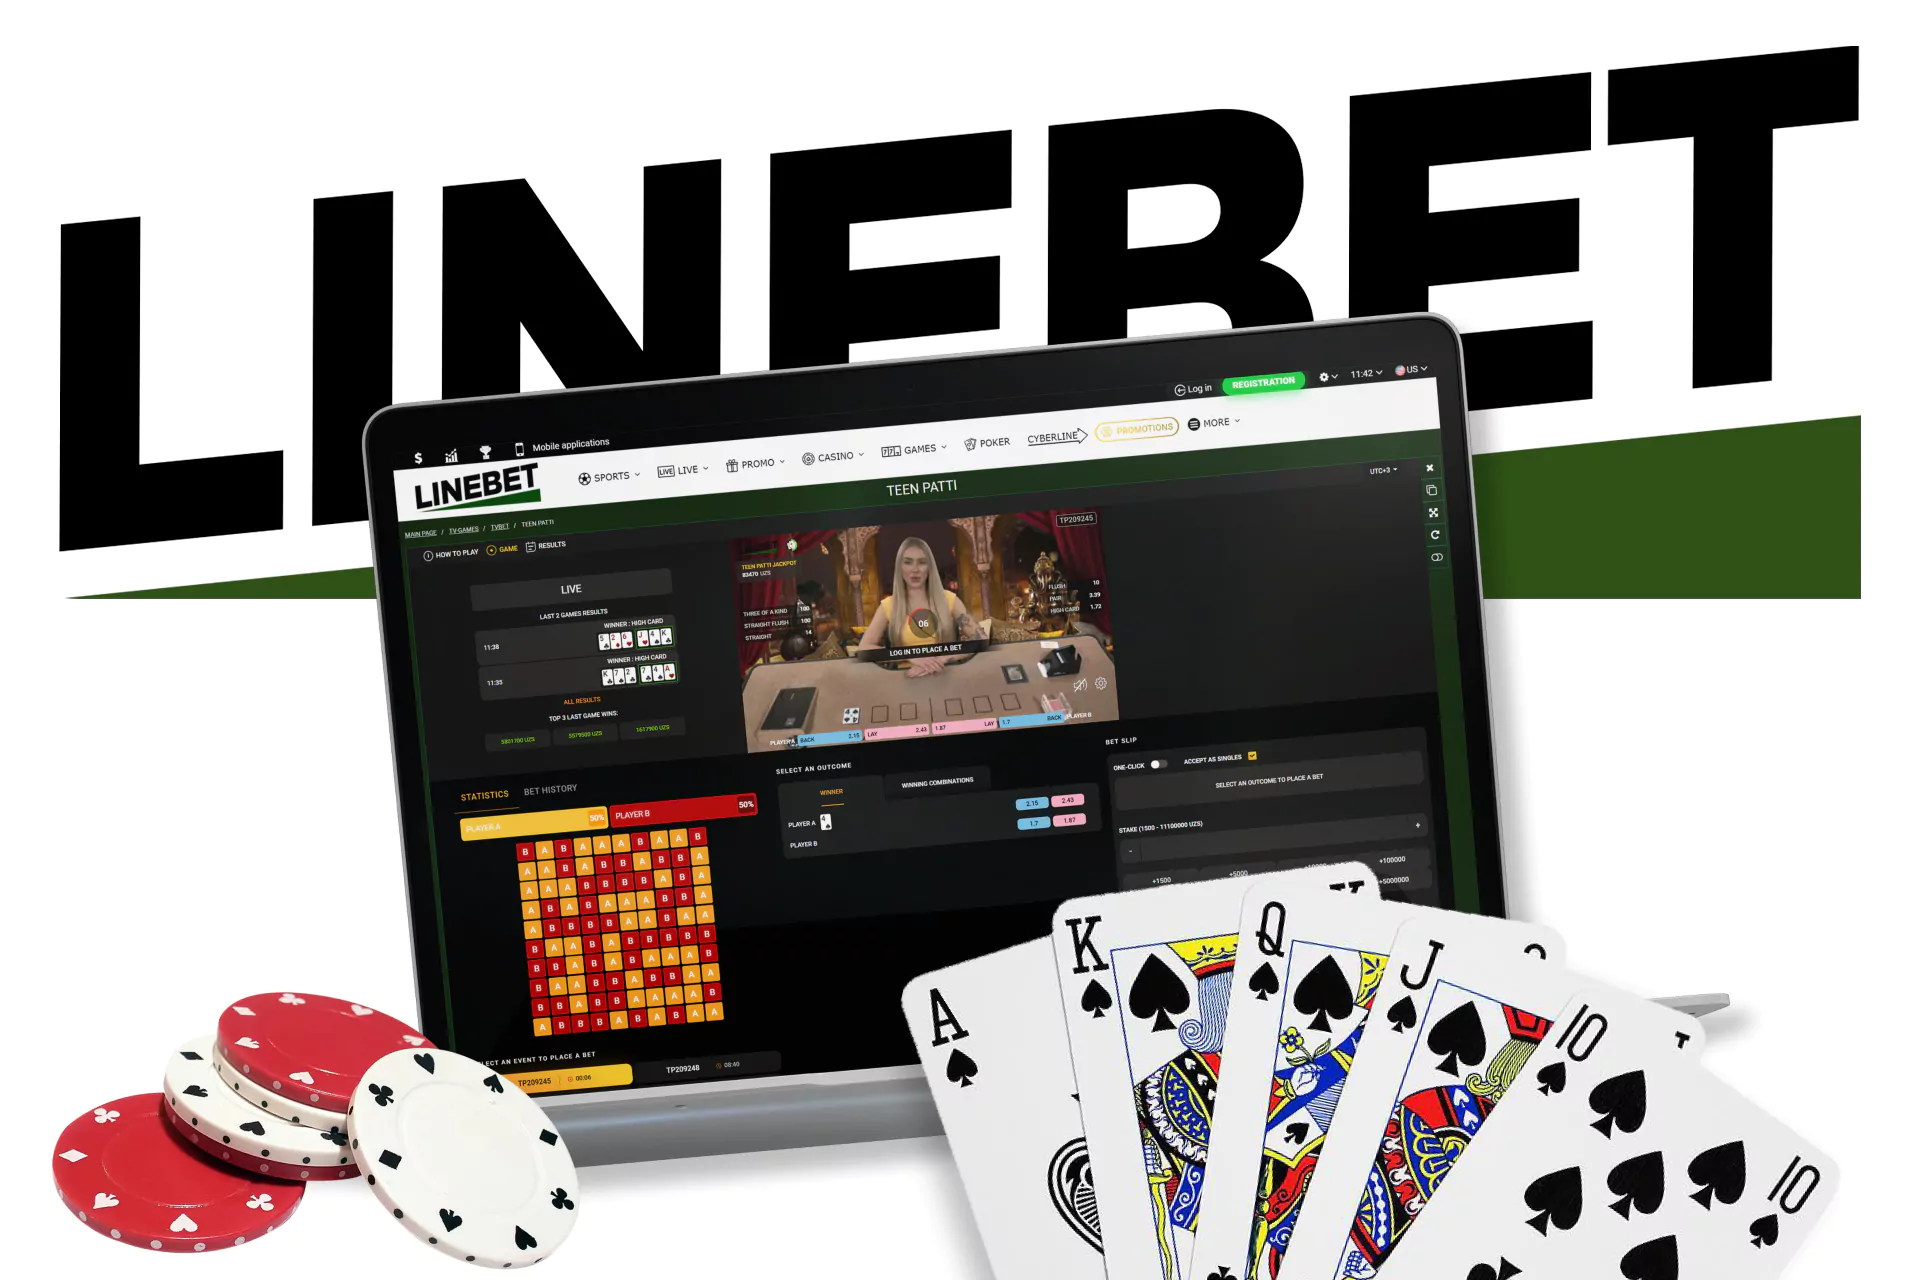 Play an interesting Teen Patti in TV games from Linebet.